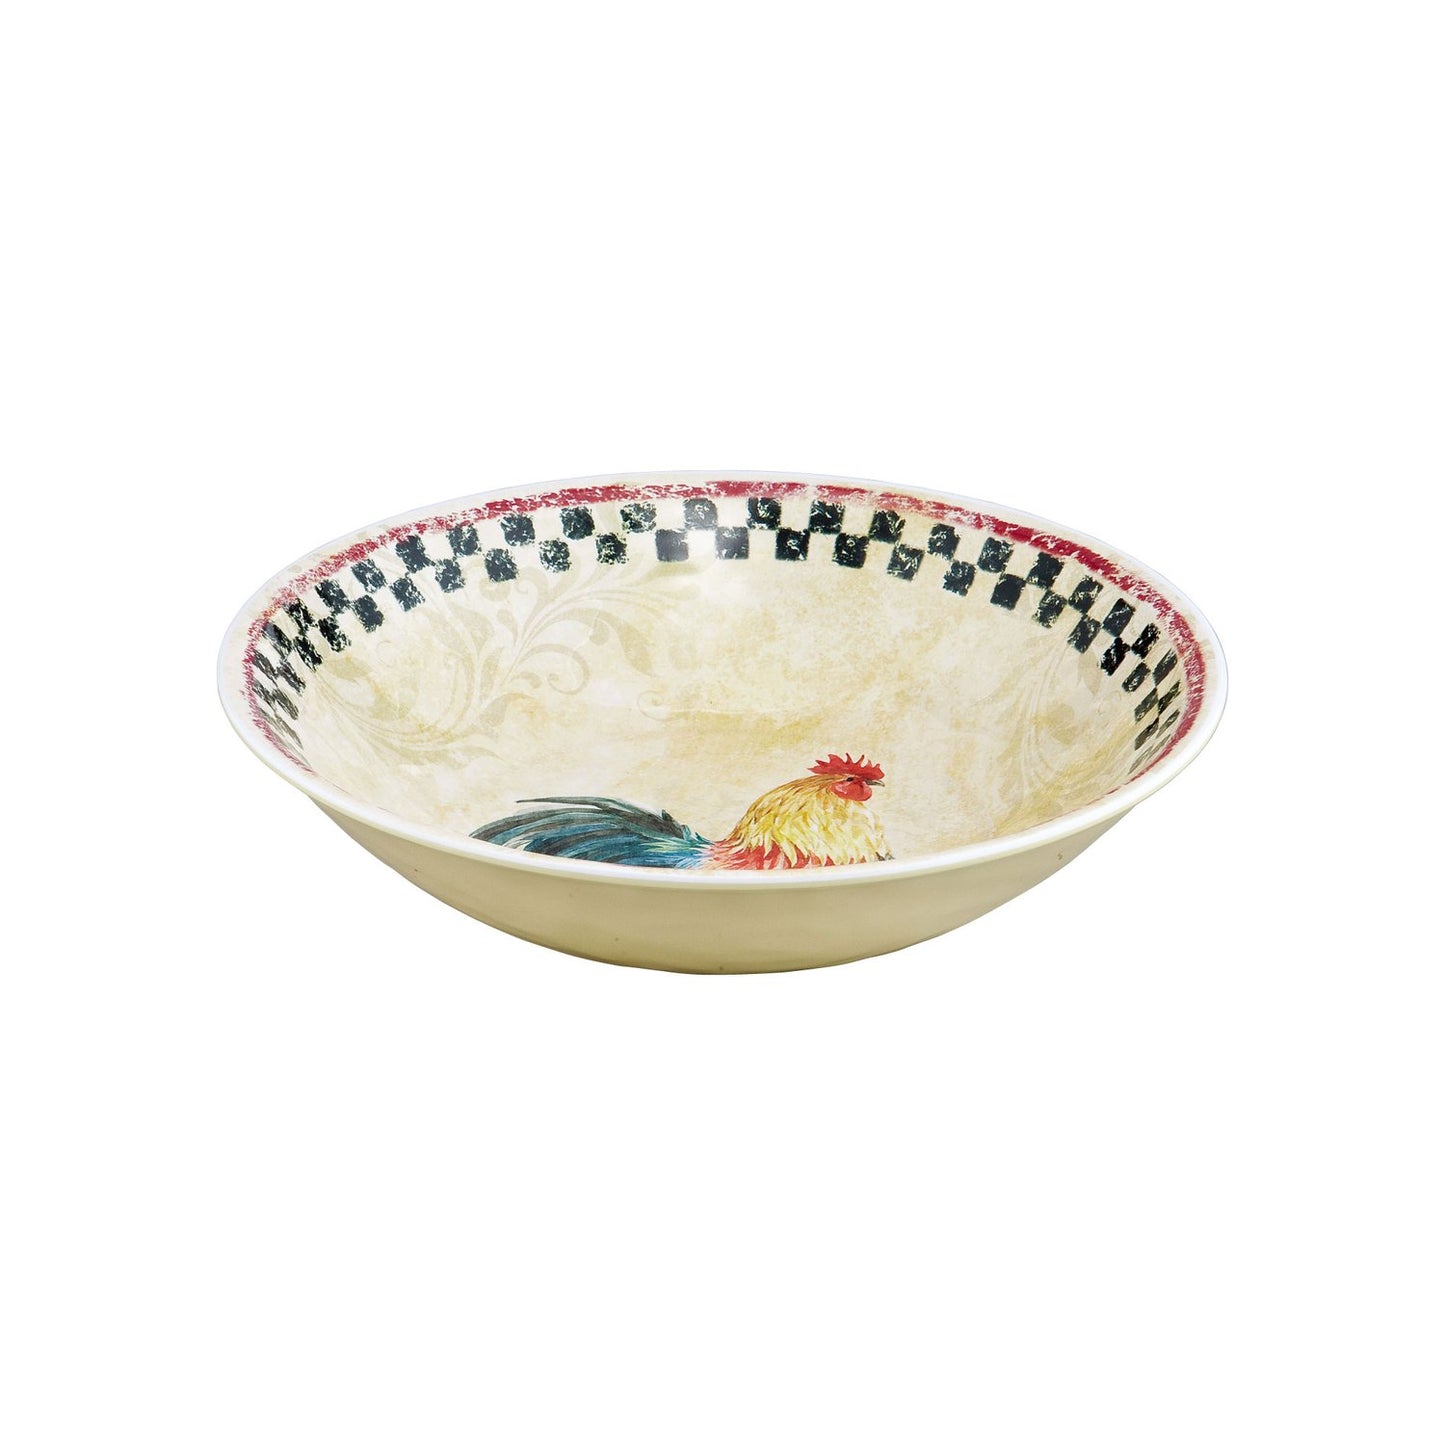 Country Rooster Melamine 8" Bowls, Set of 6